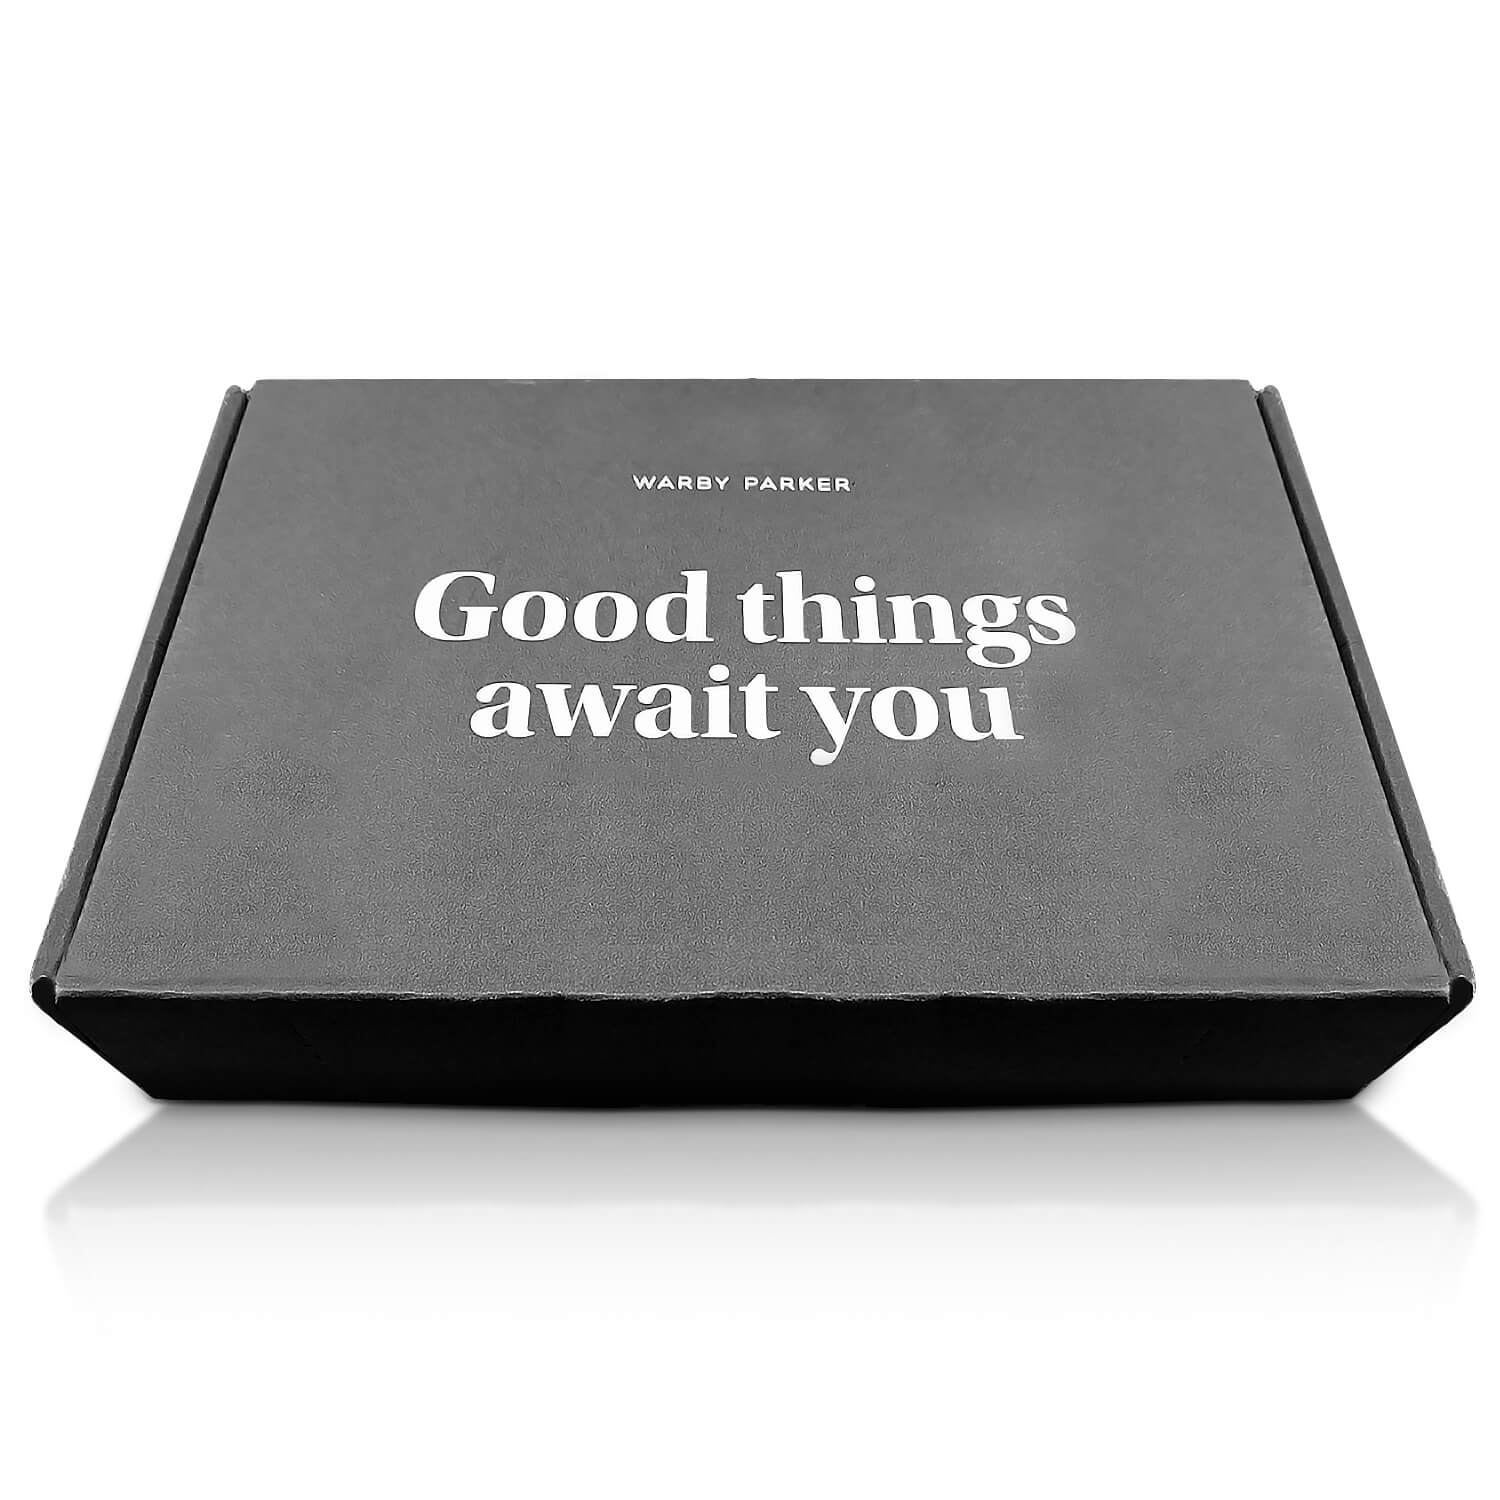 warby parker good things await you